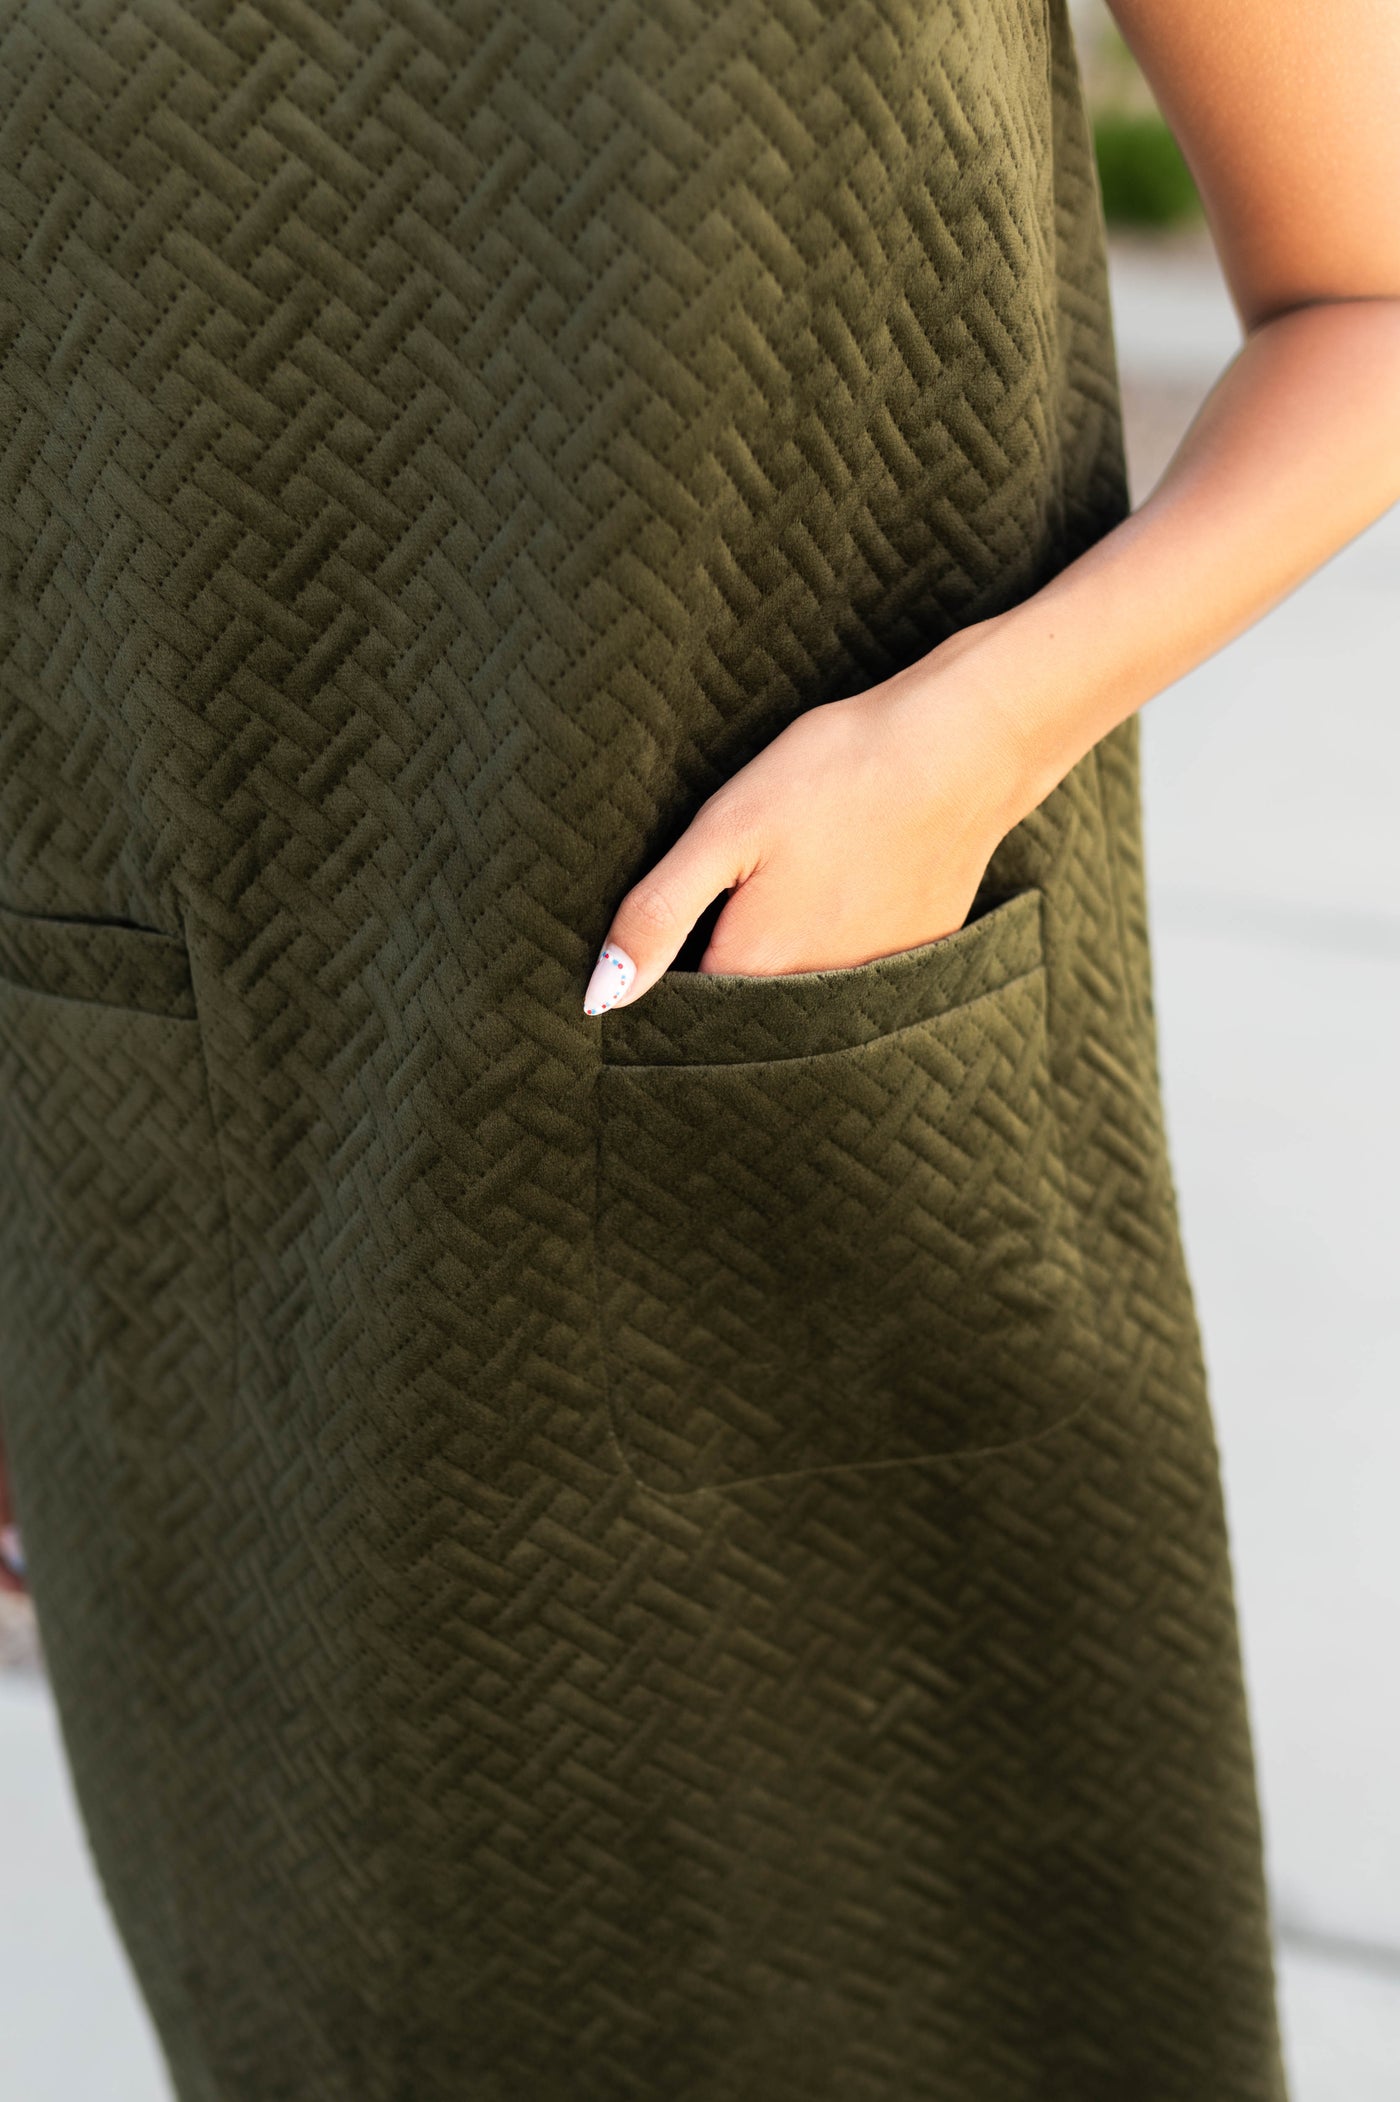 Fabric pattern of a olive dress